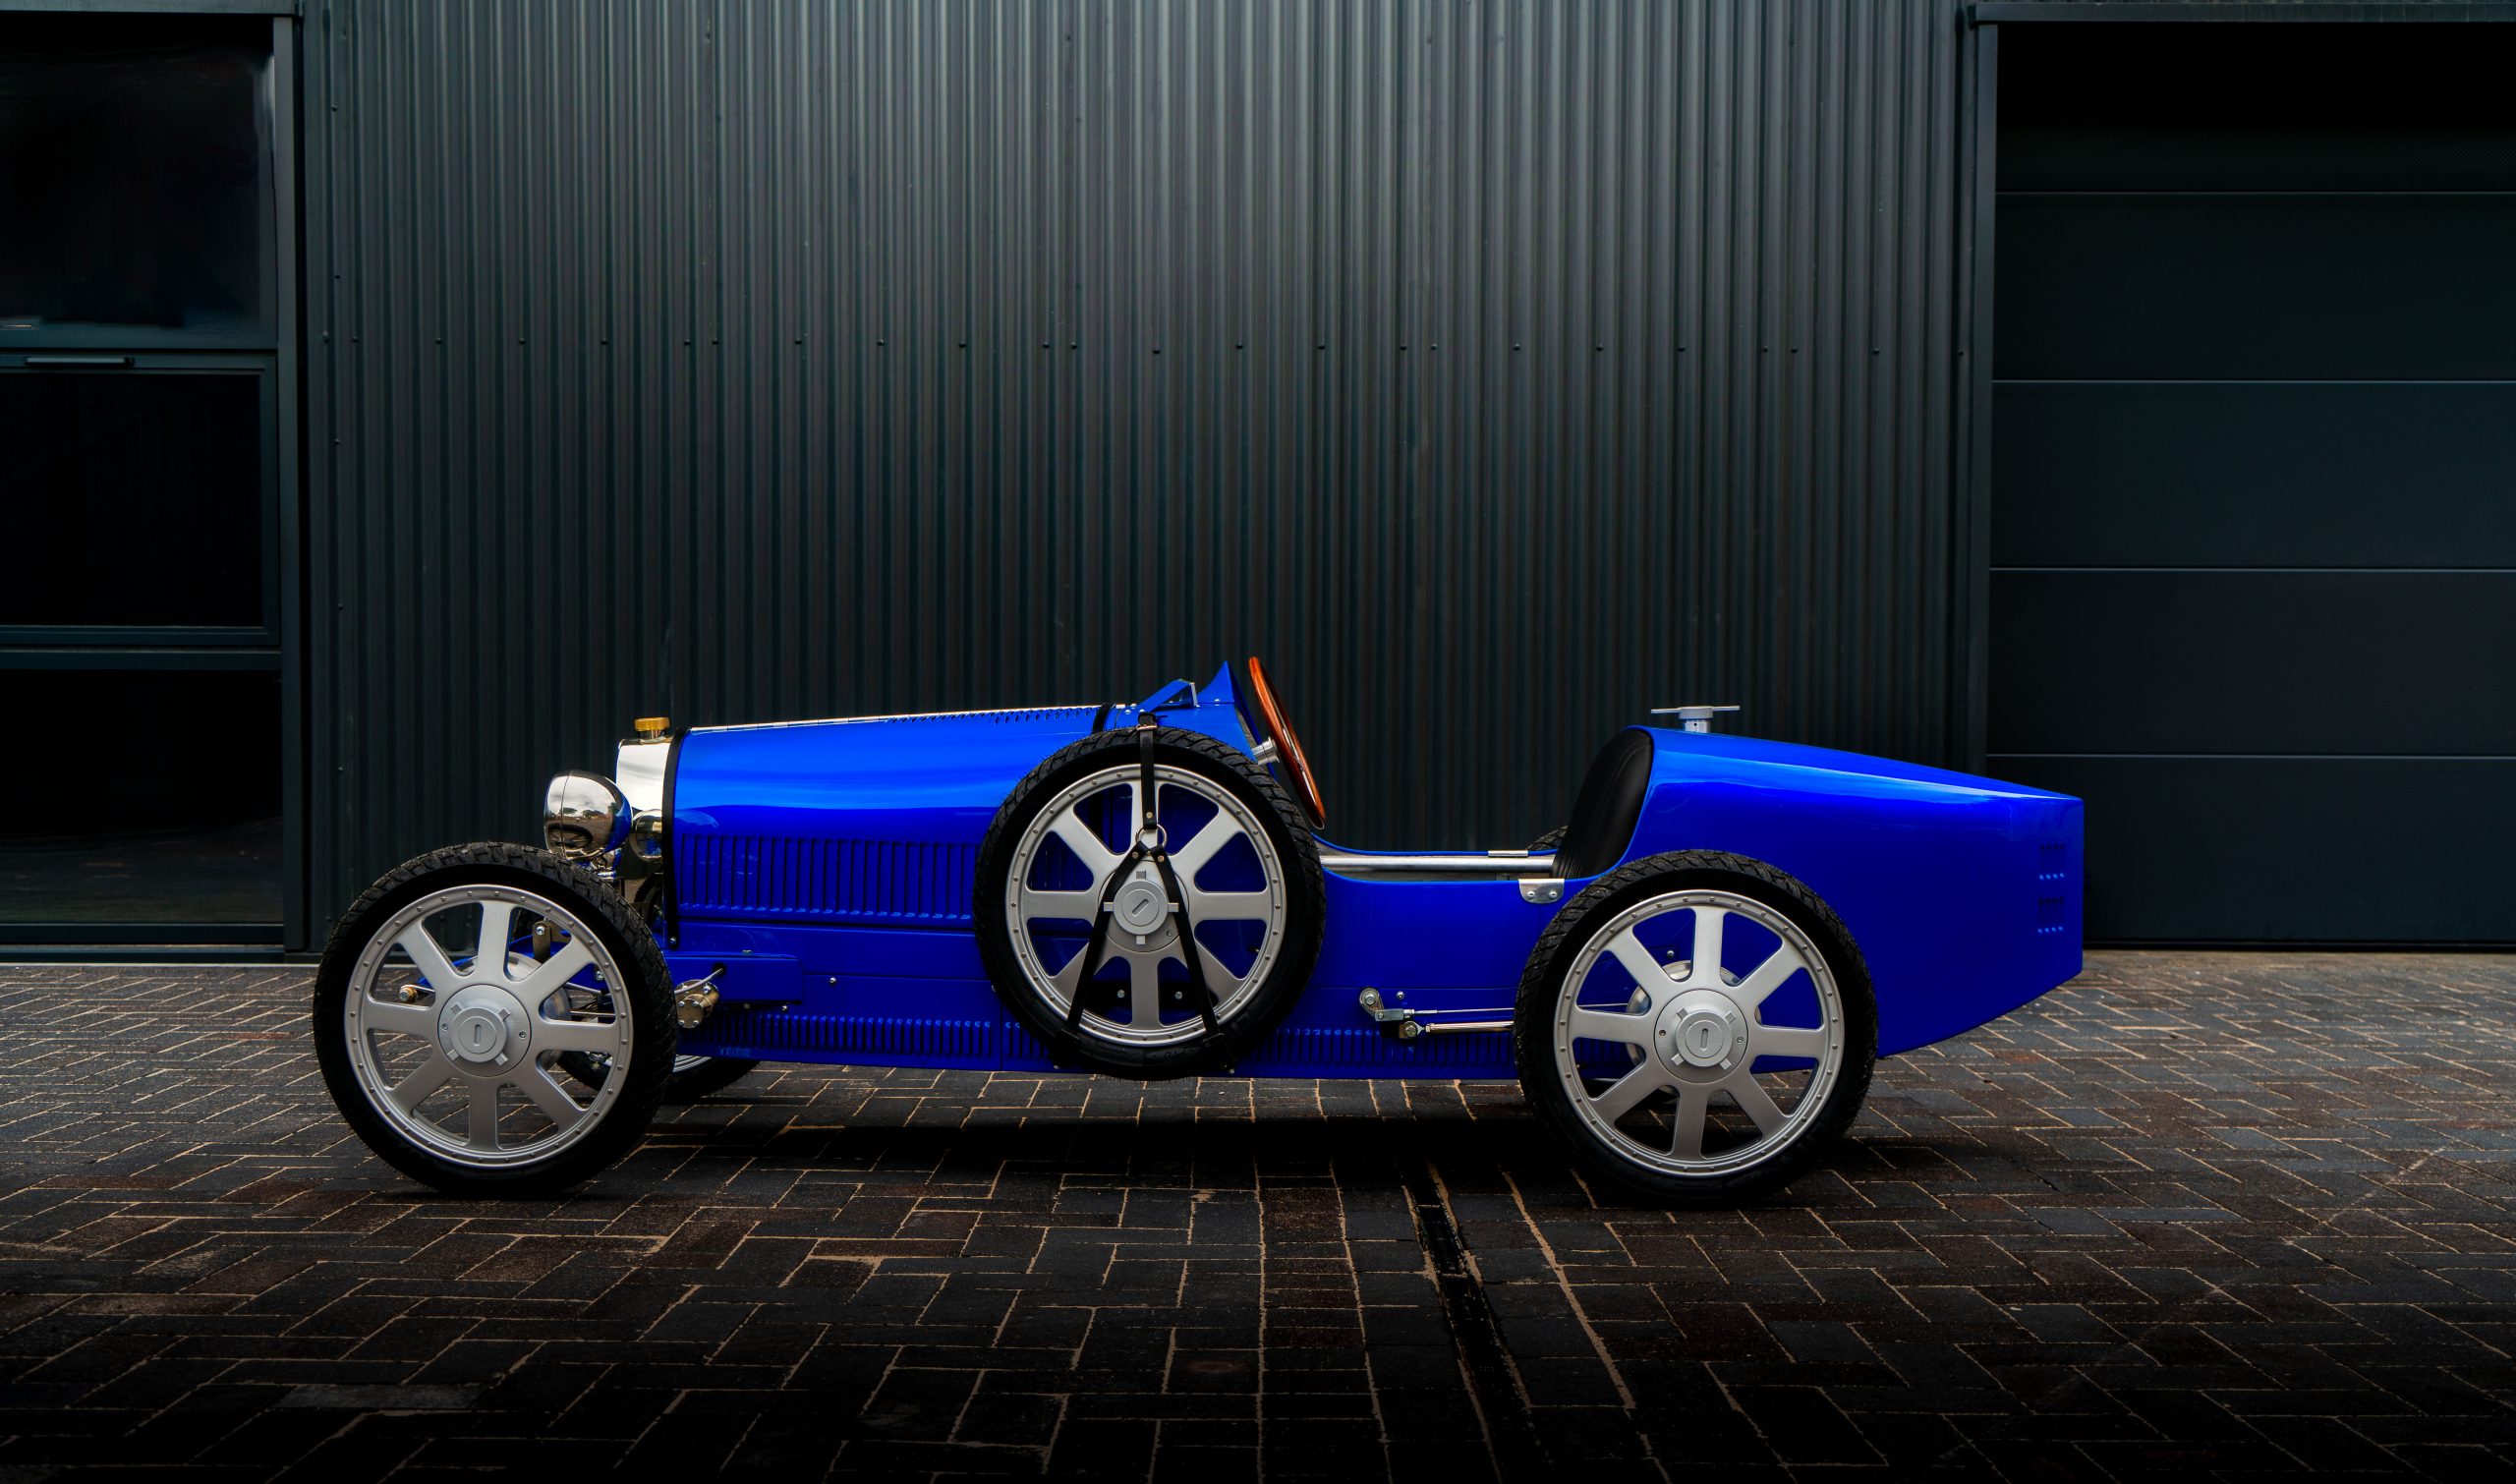 Meet the baby Bugatti tuned to perfection by a Le Mans winner